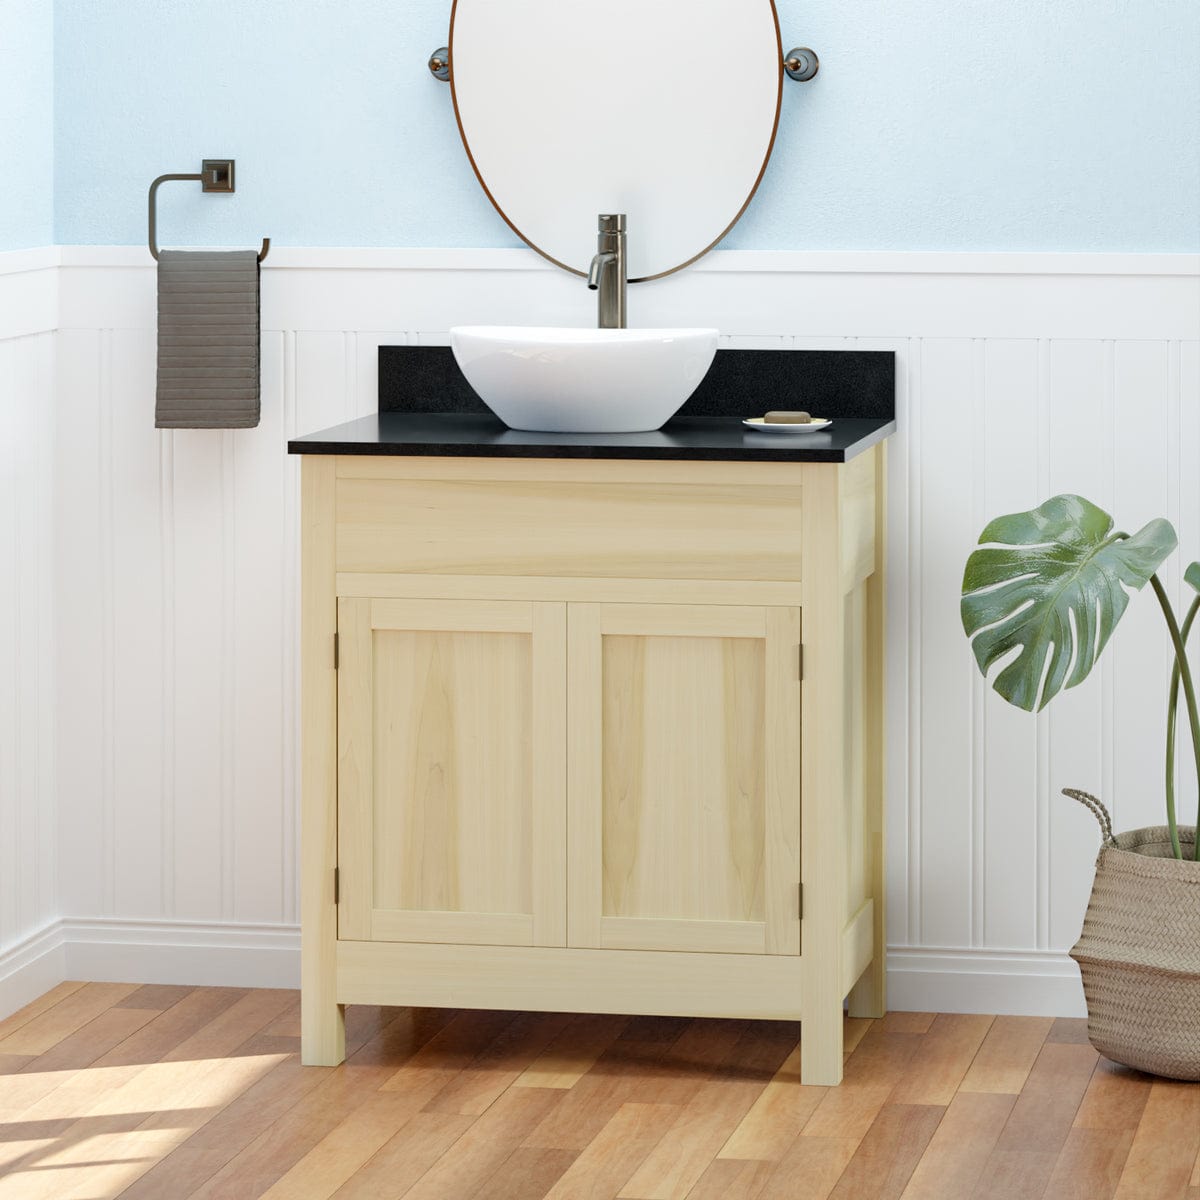 30 in. Sink and Drawer Base Vanity Bathroom Cabinet in Unfinished Poplar |  Shaker Style